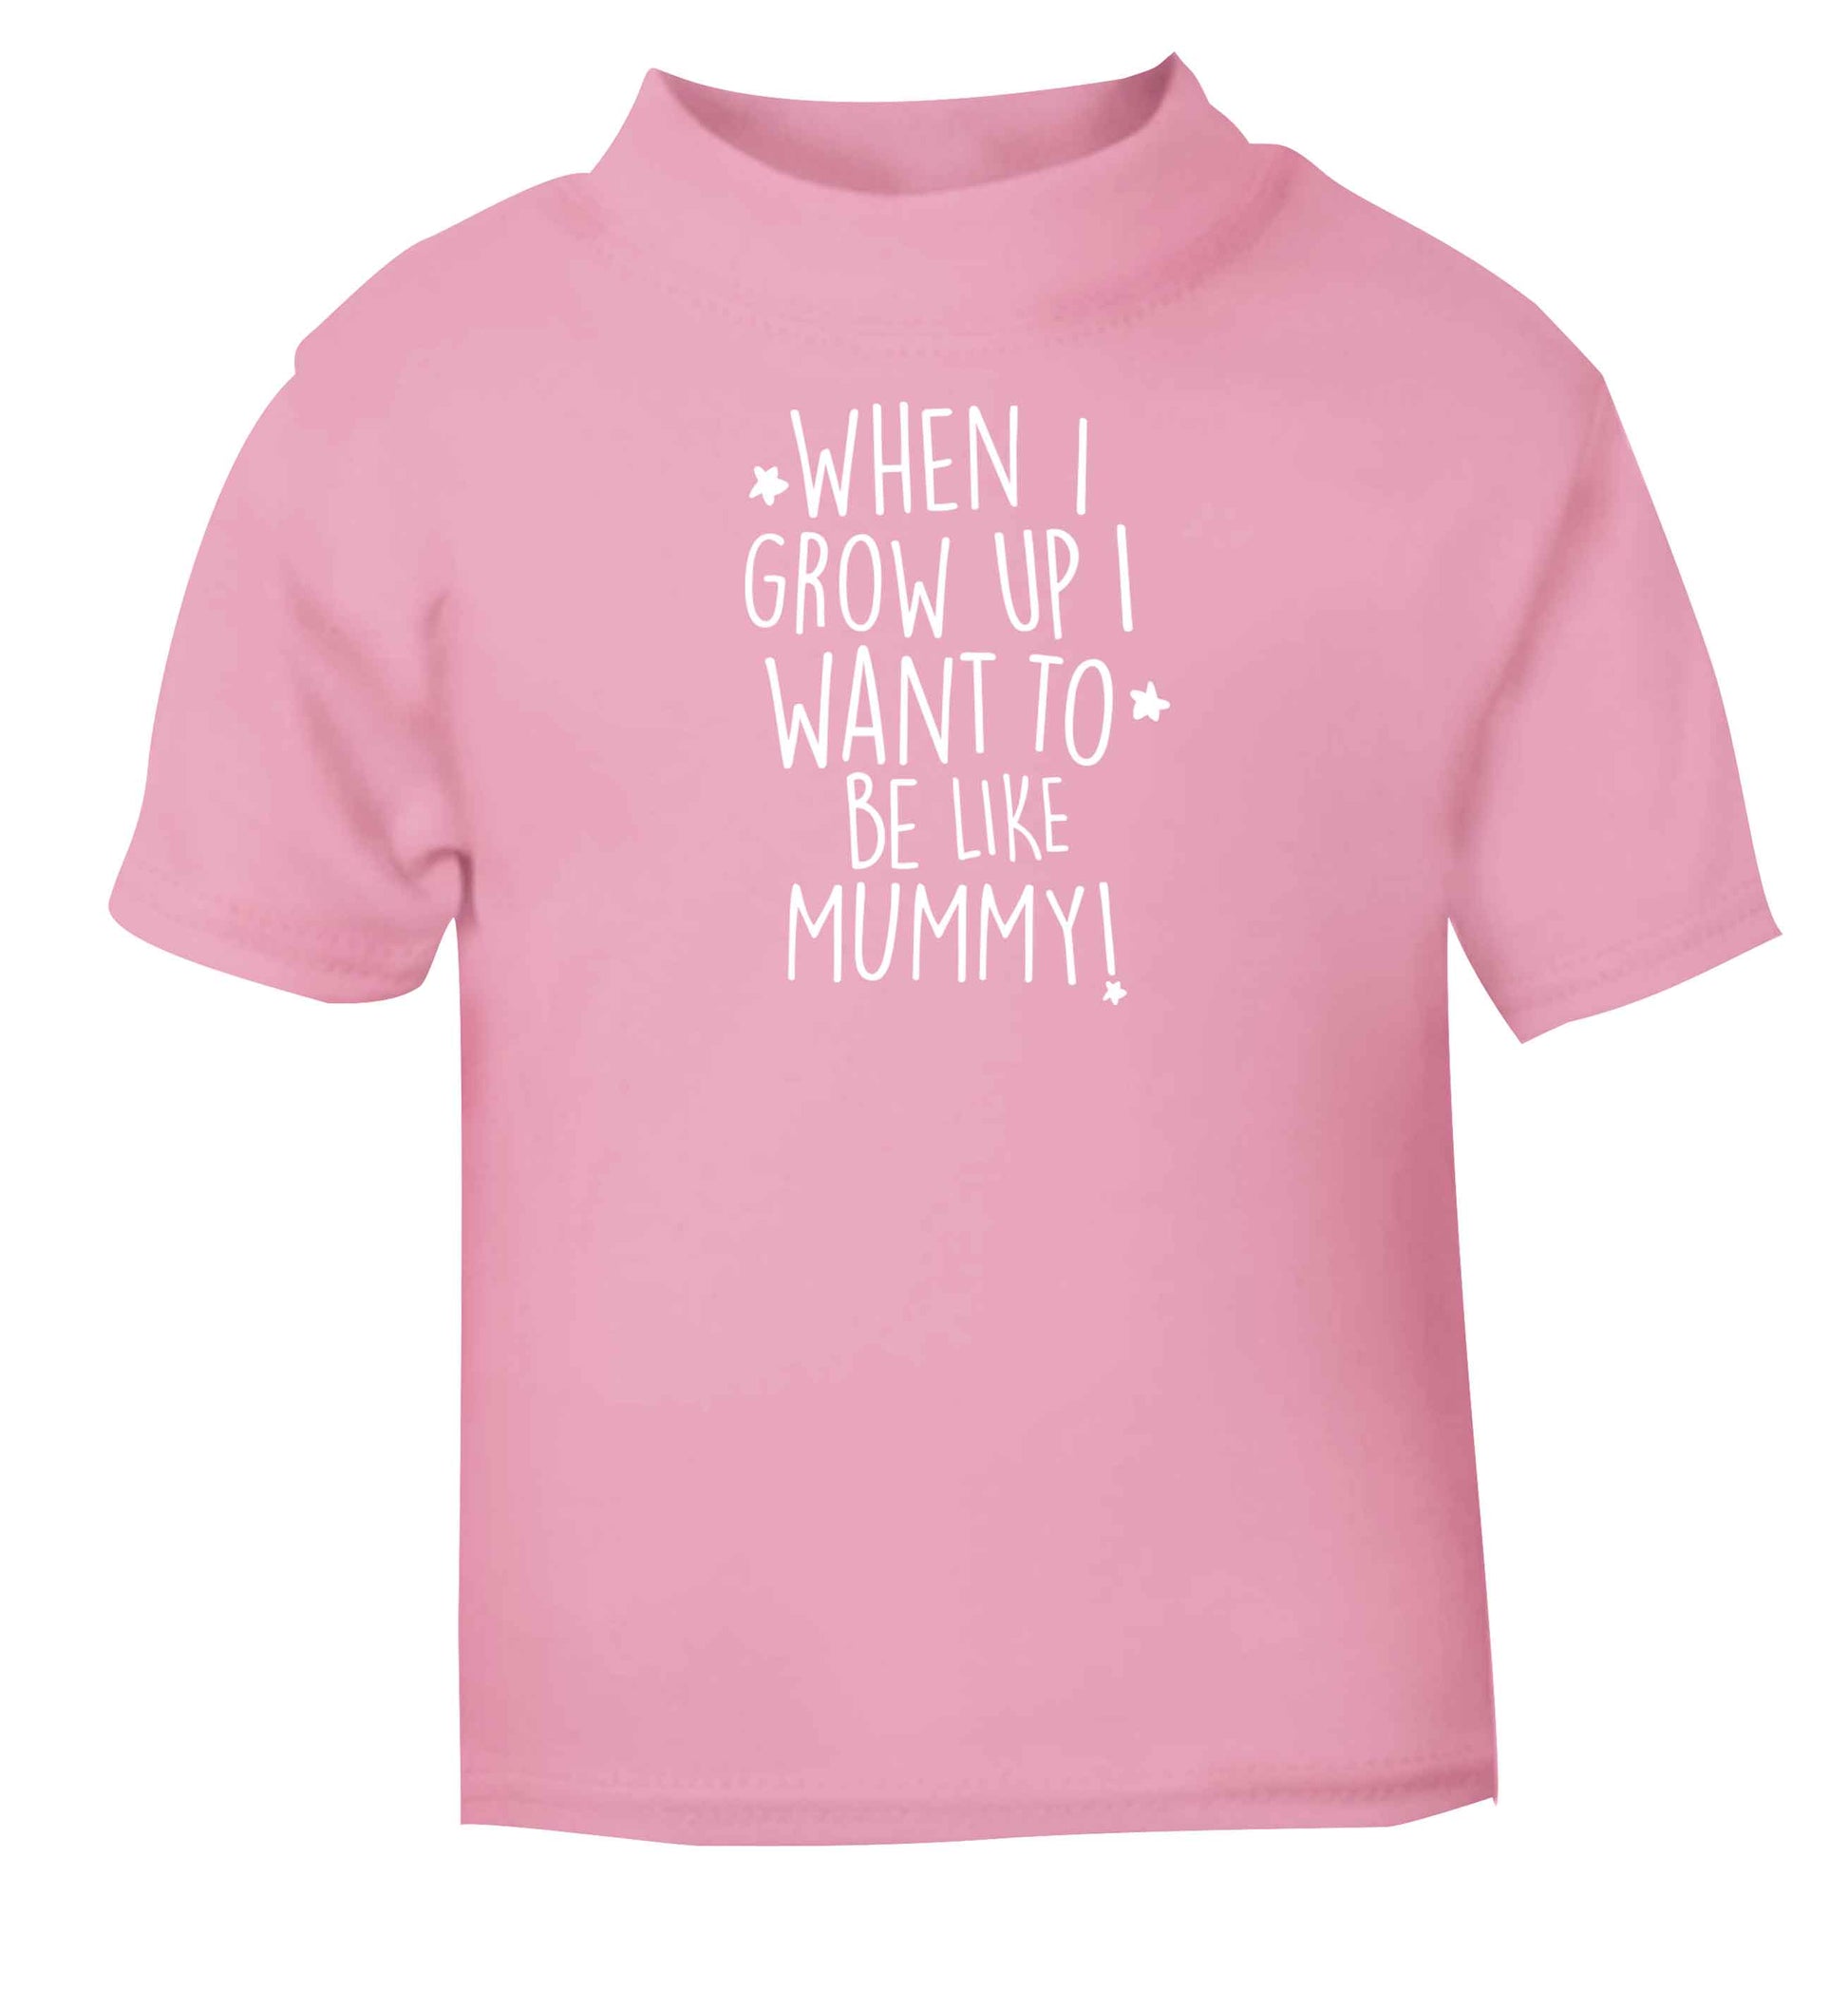 When I grow up I want to be like my mummy Children's light pink Tshirt 12-13 Years